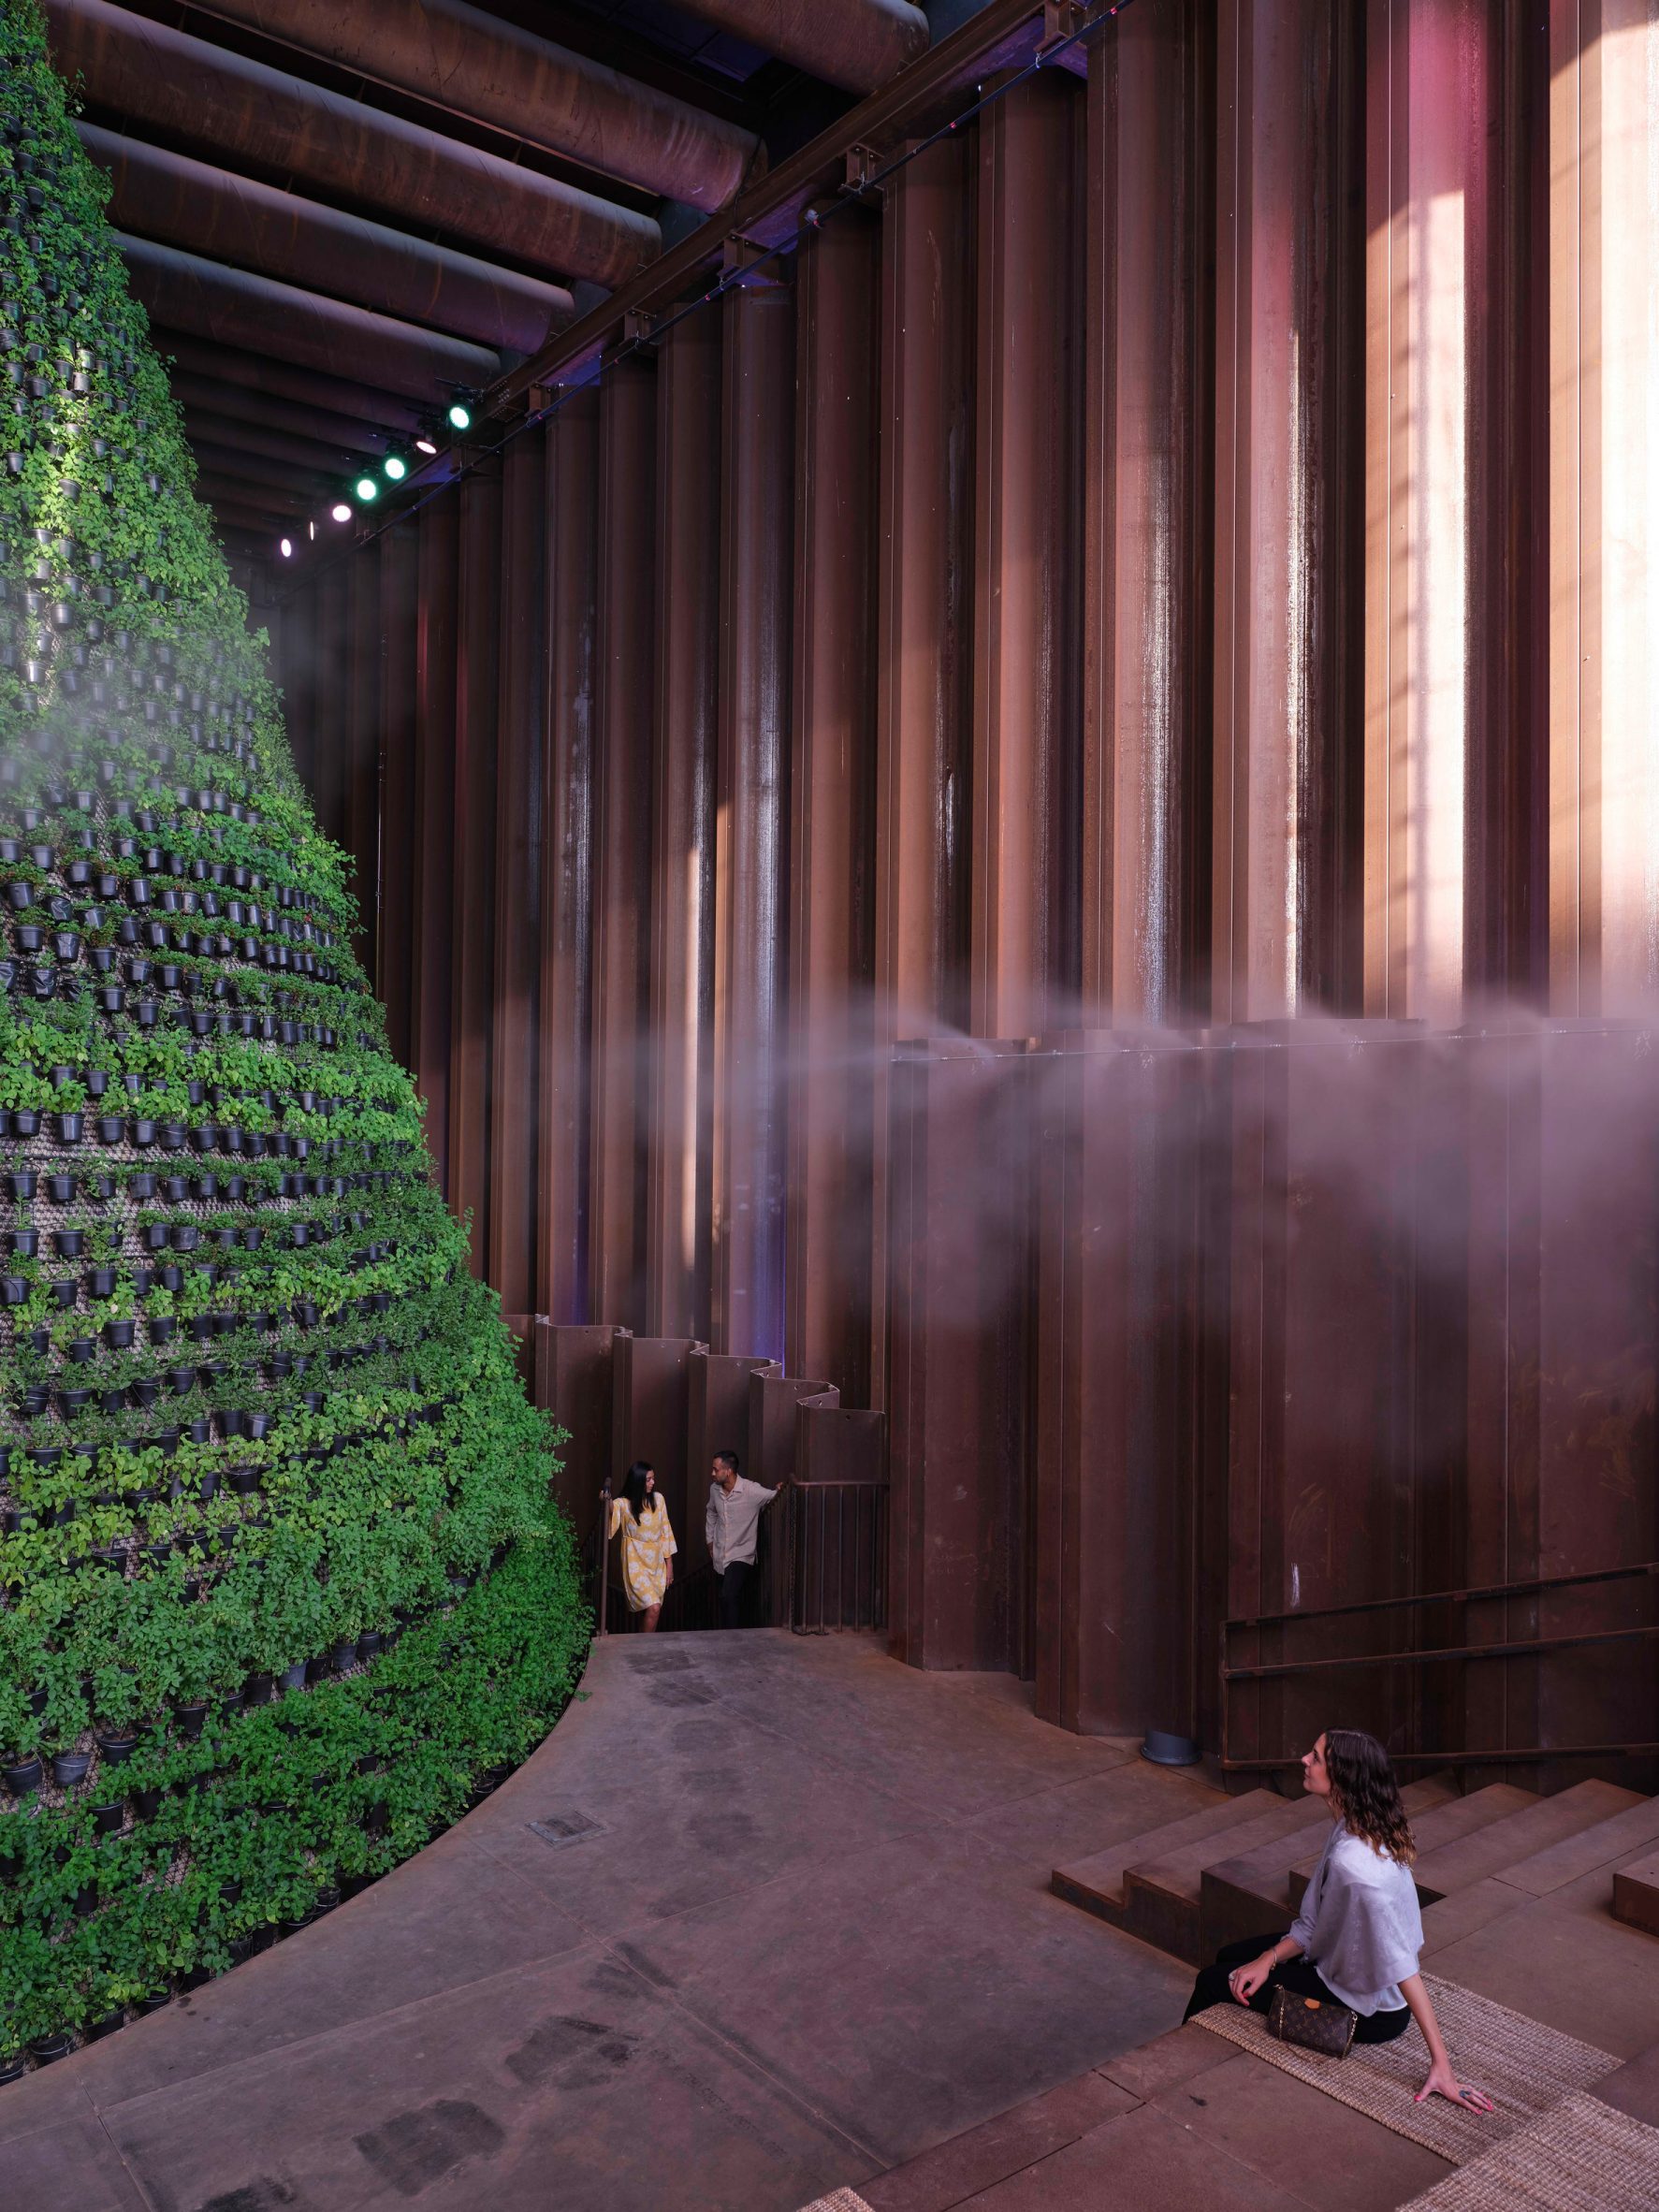 Expo 2020 Dubai unveils reverse waterfall, observation tower